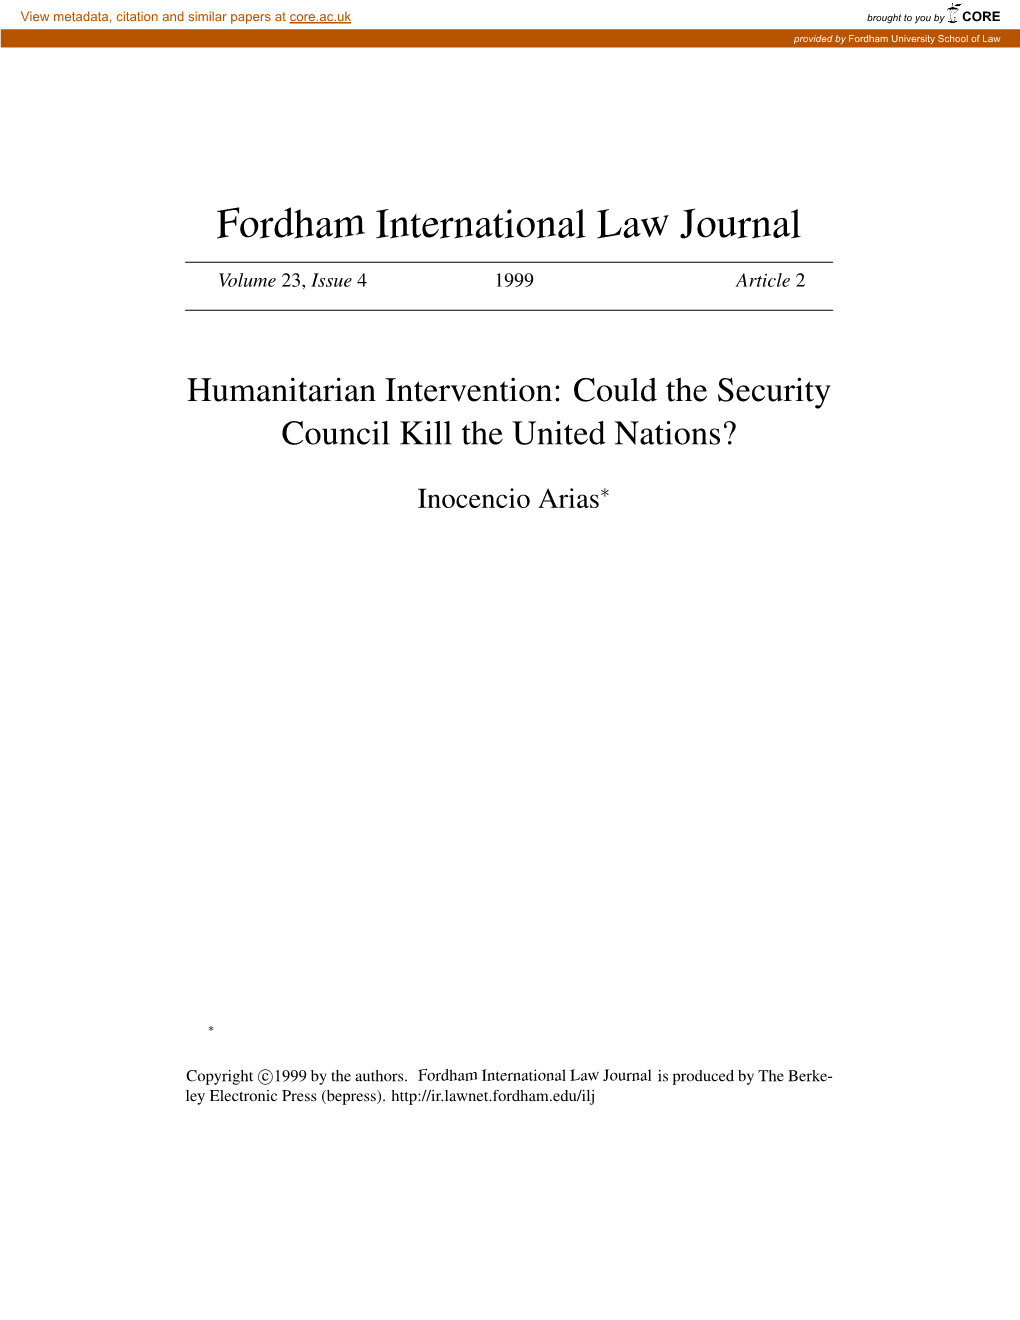 Humanitarian Intervention: Could the Security Council Kill the United Nations?